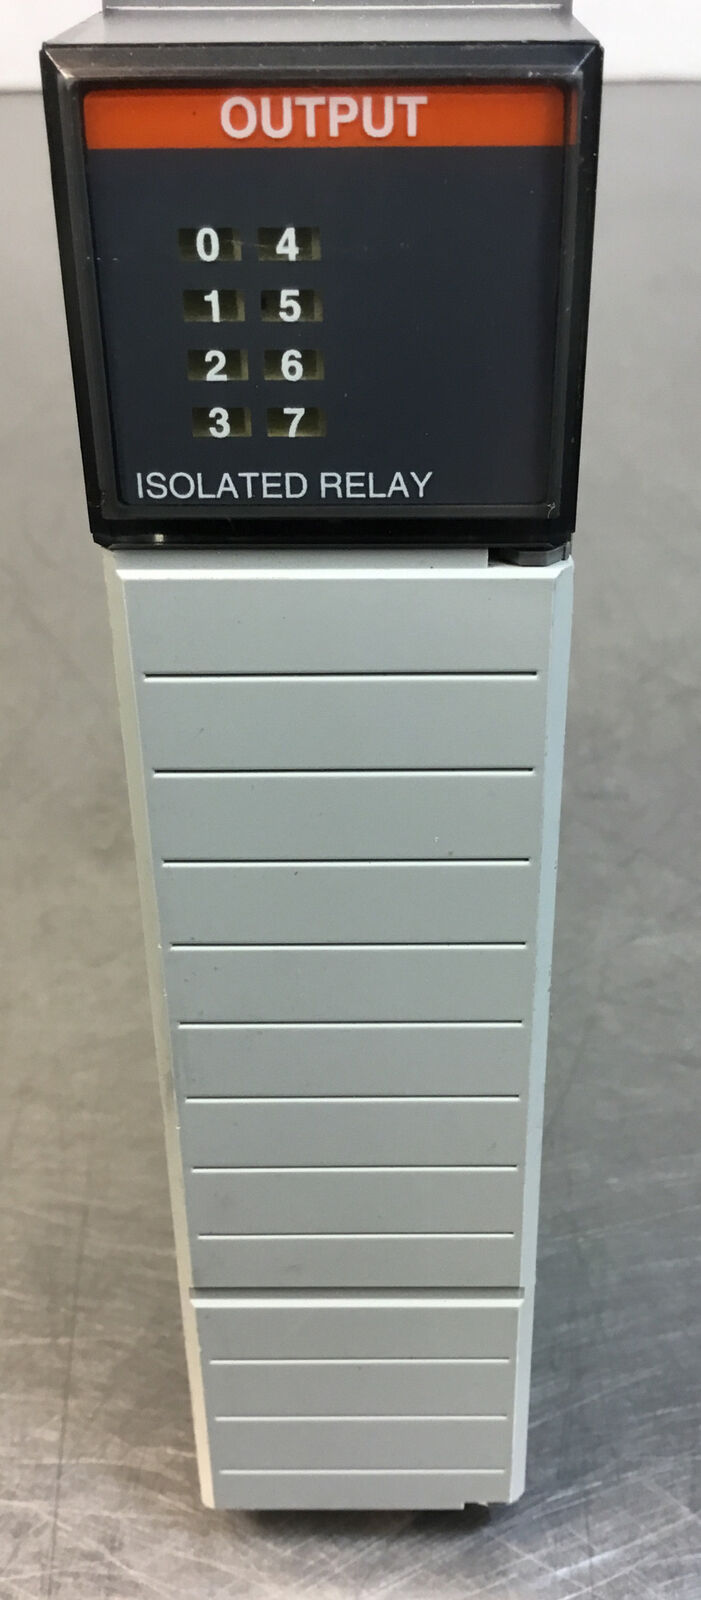 Allen-Bradley SLC500 1746-OX8 / A  Isolated Relay Output Module  3D-14